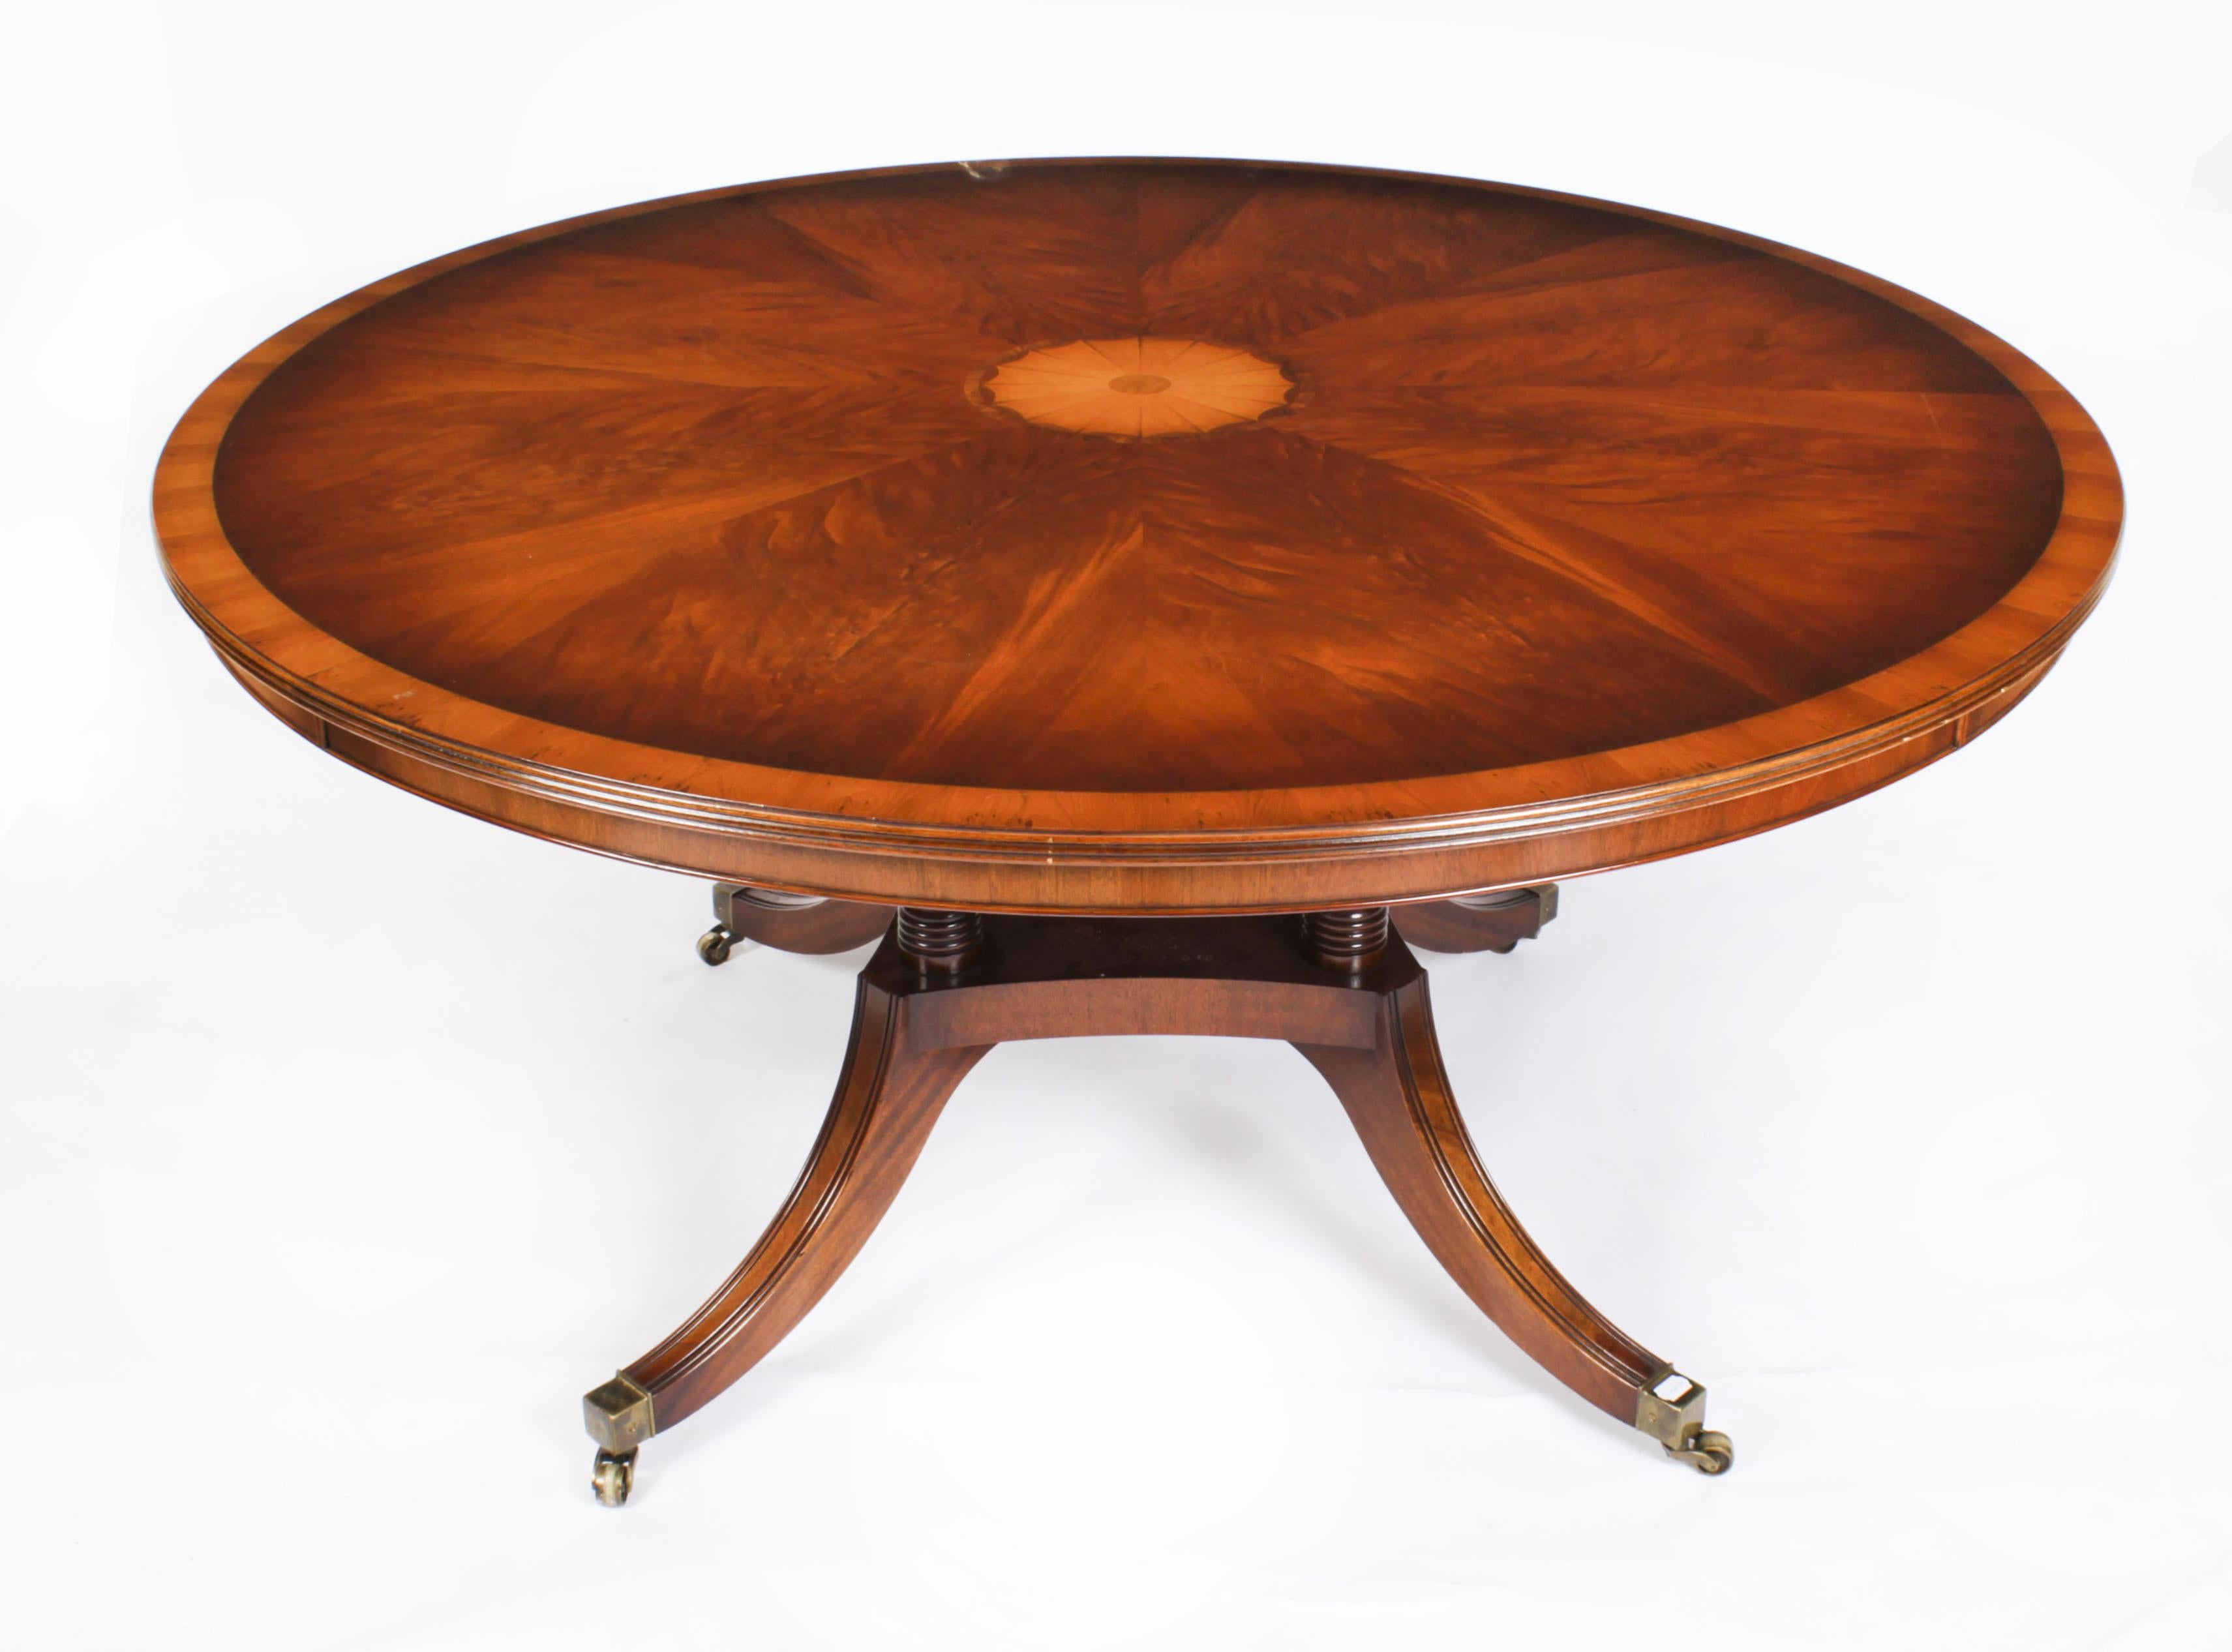 This is a beautiful vintage Regency Revival walnut and satinwood banded circular dining table, dating from Circa 1980.

The fabulous 5ft diameter table can seat six people in comfort. The top is crossbanded with satinwood and features ebony